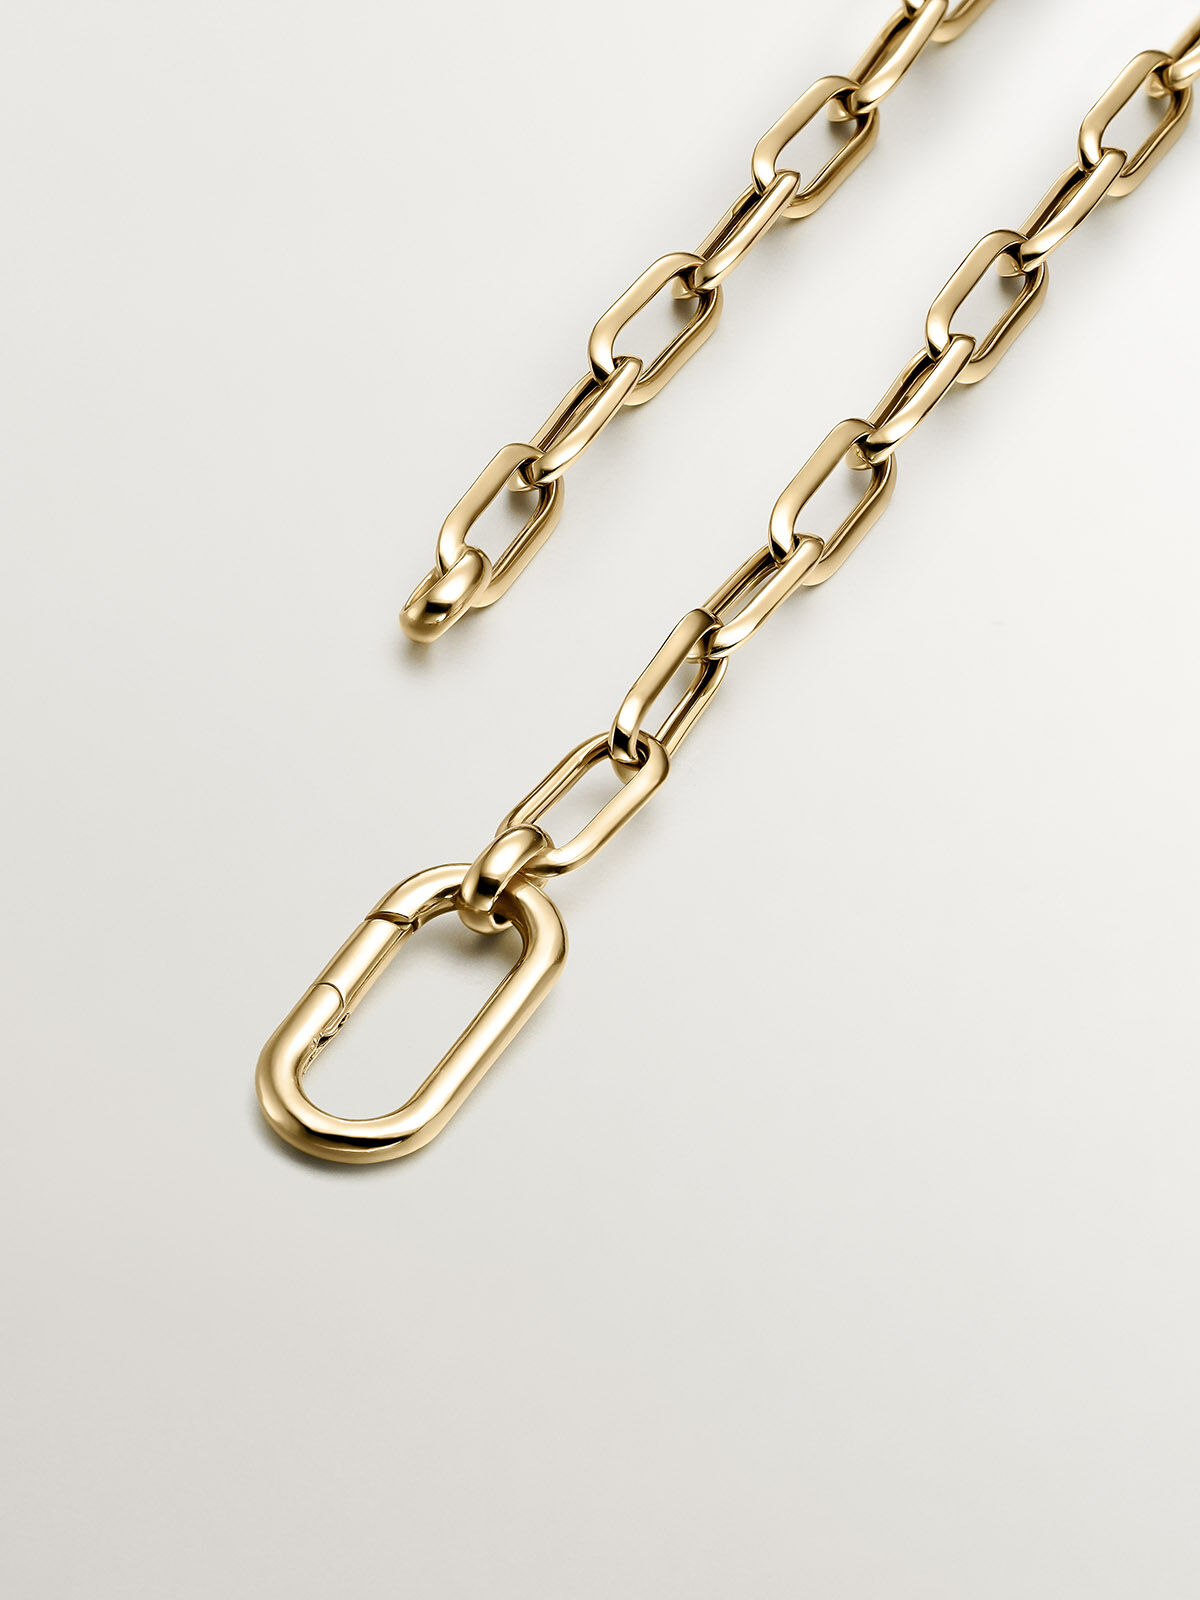 Chain of rectangular links made of 925 silver, coated in 18K 